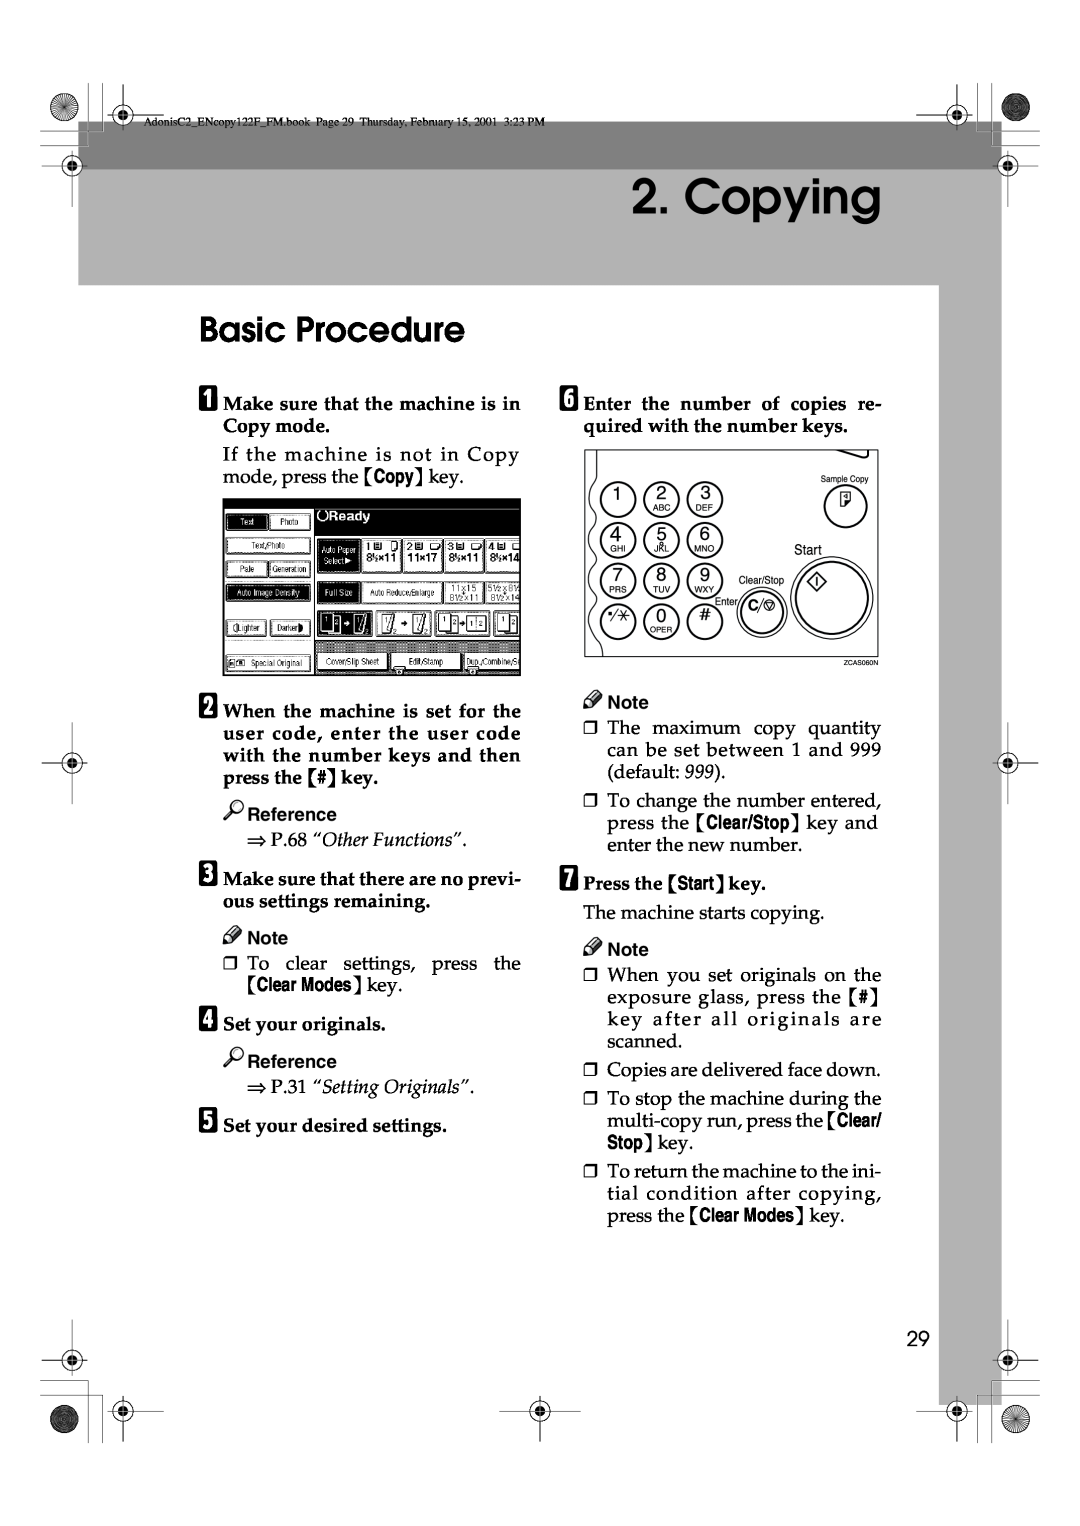 Savin 3502/3502p, 2235 Copying, Basic Procedure, A Make sure that the machine is in Copy mode, ⇒ P.68 “Other Functions” 